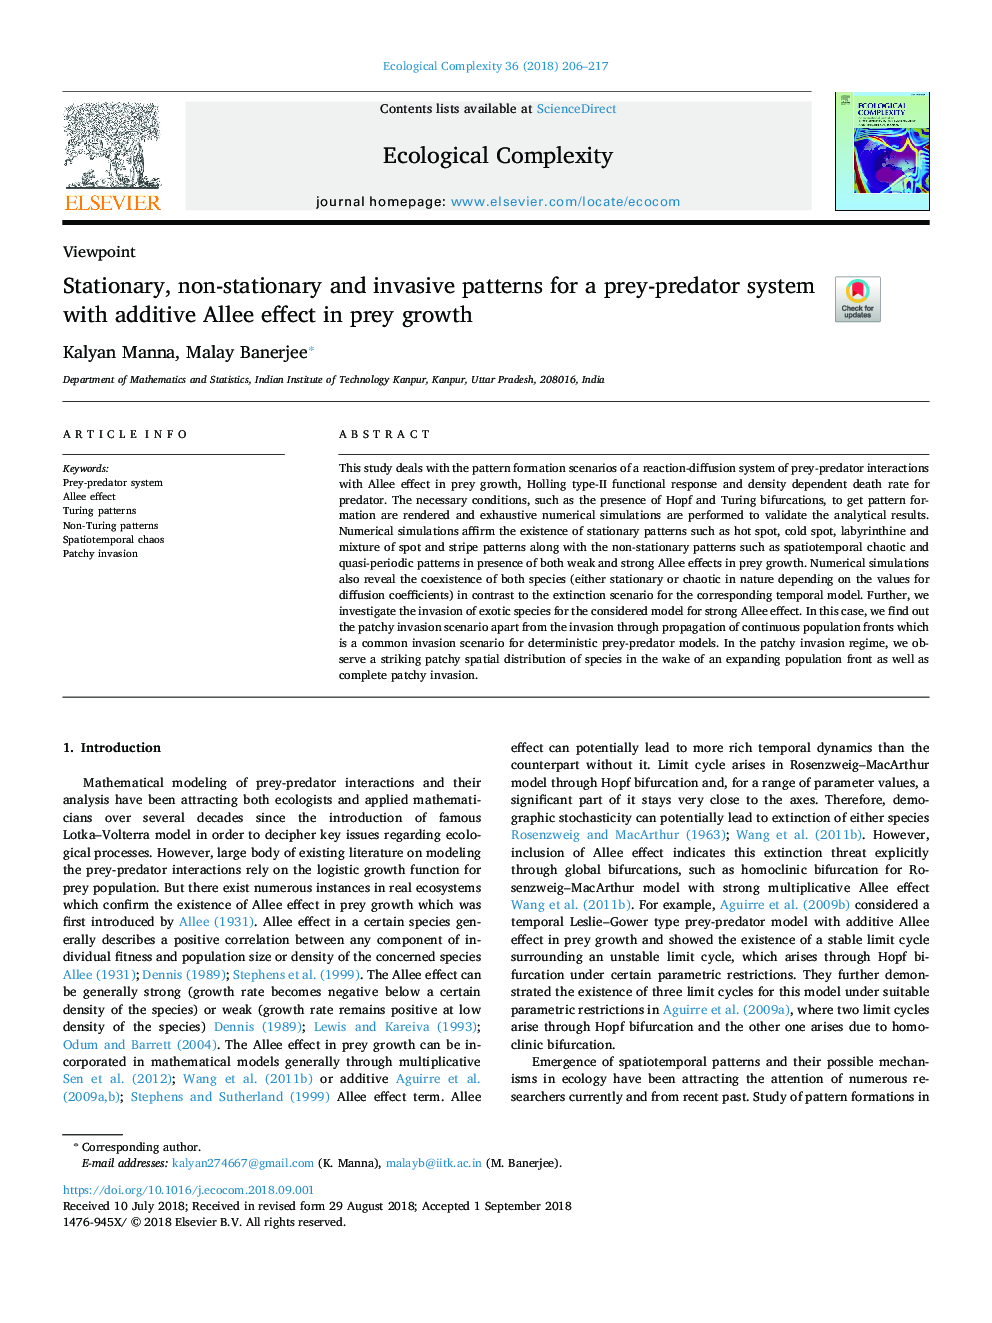 Stationary, non-stationary and invasive patterns for a prey-predator system with additive Allee effect in prey growth